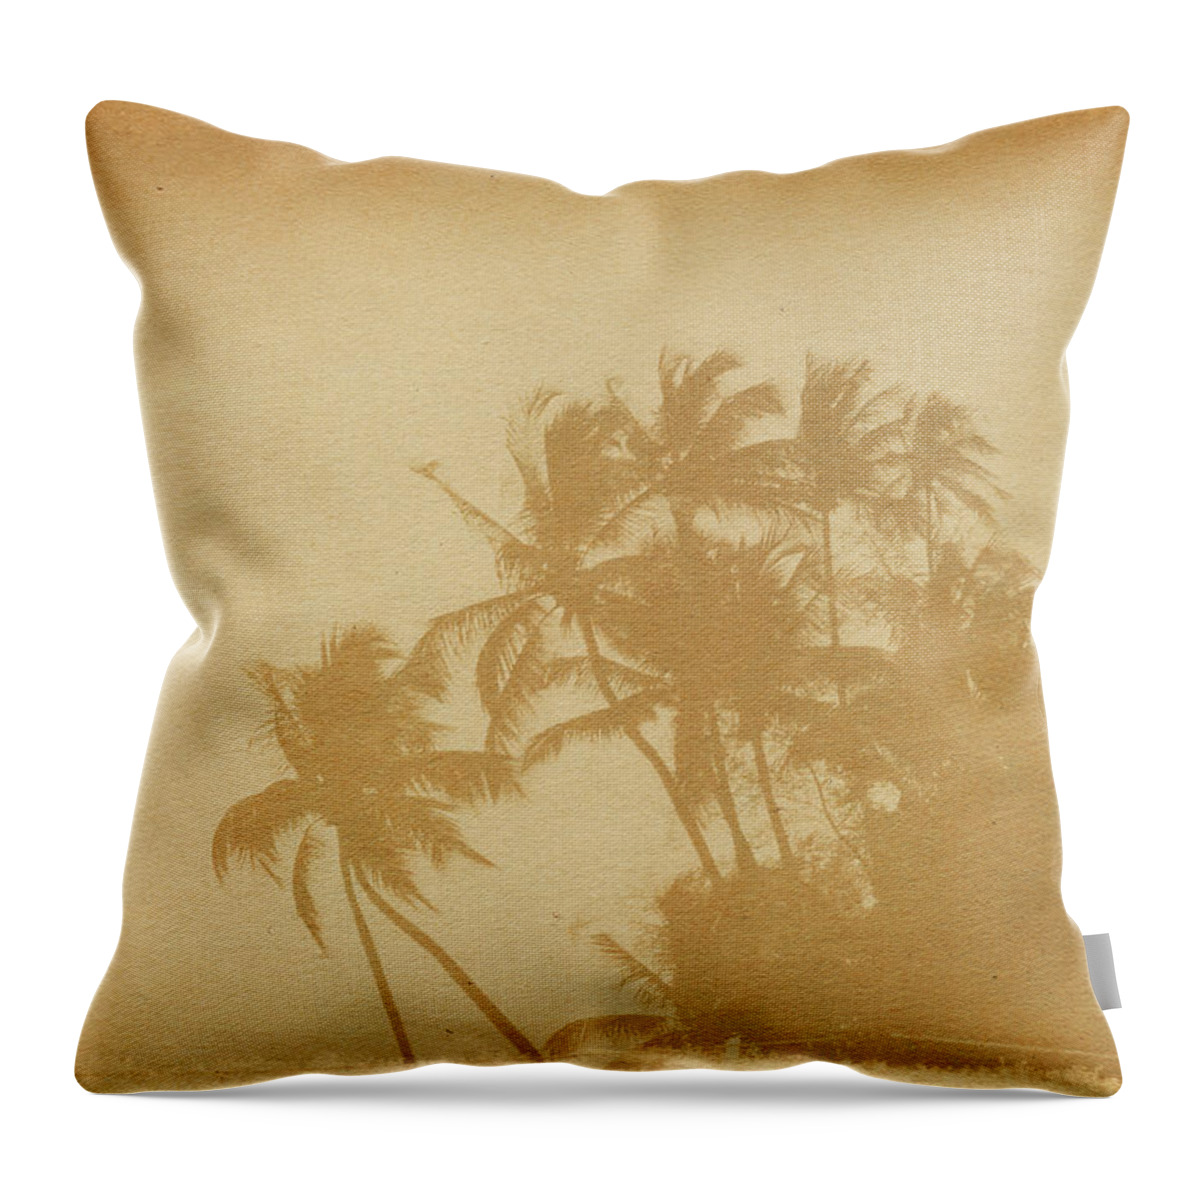 Aging Process Throw Pillow featuring the photograph Palm Paper by Nic taylor